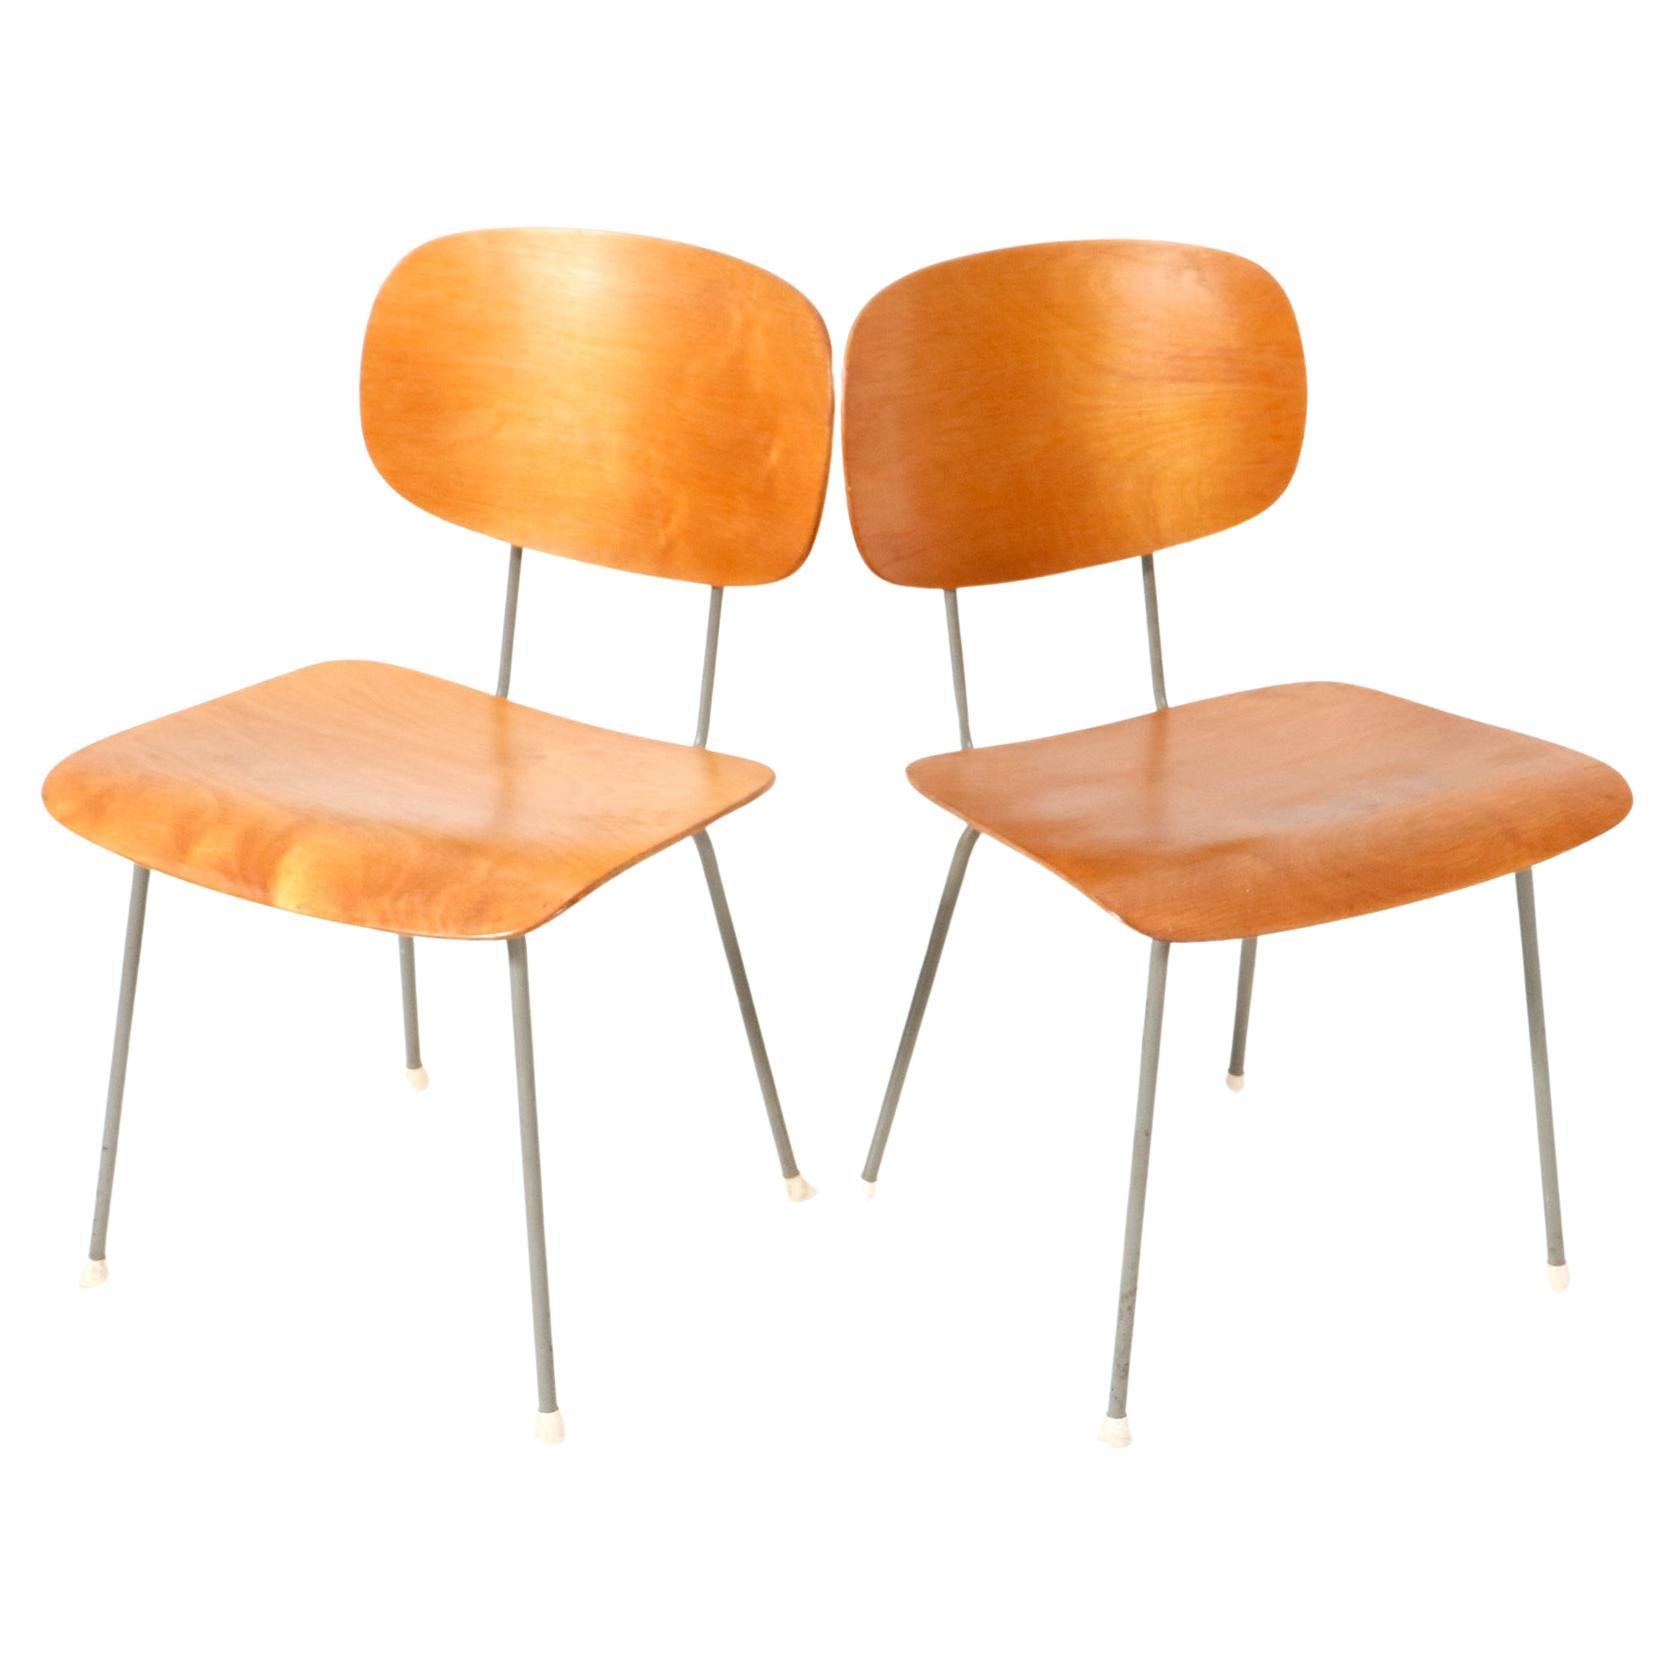 Pair of Mid-Century Modern Model 116 Side Chairs by Wim Rietveld for Gispen